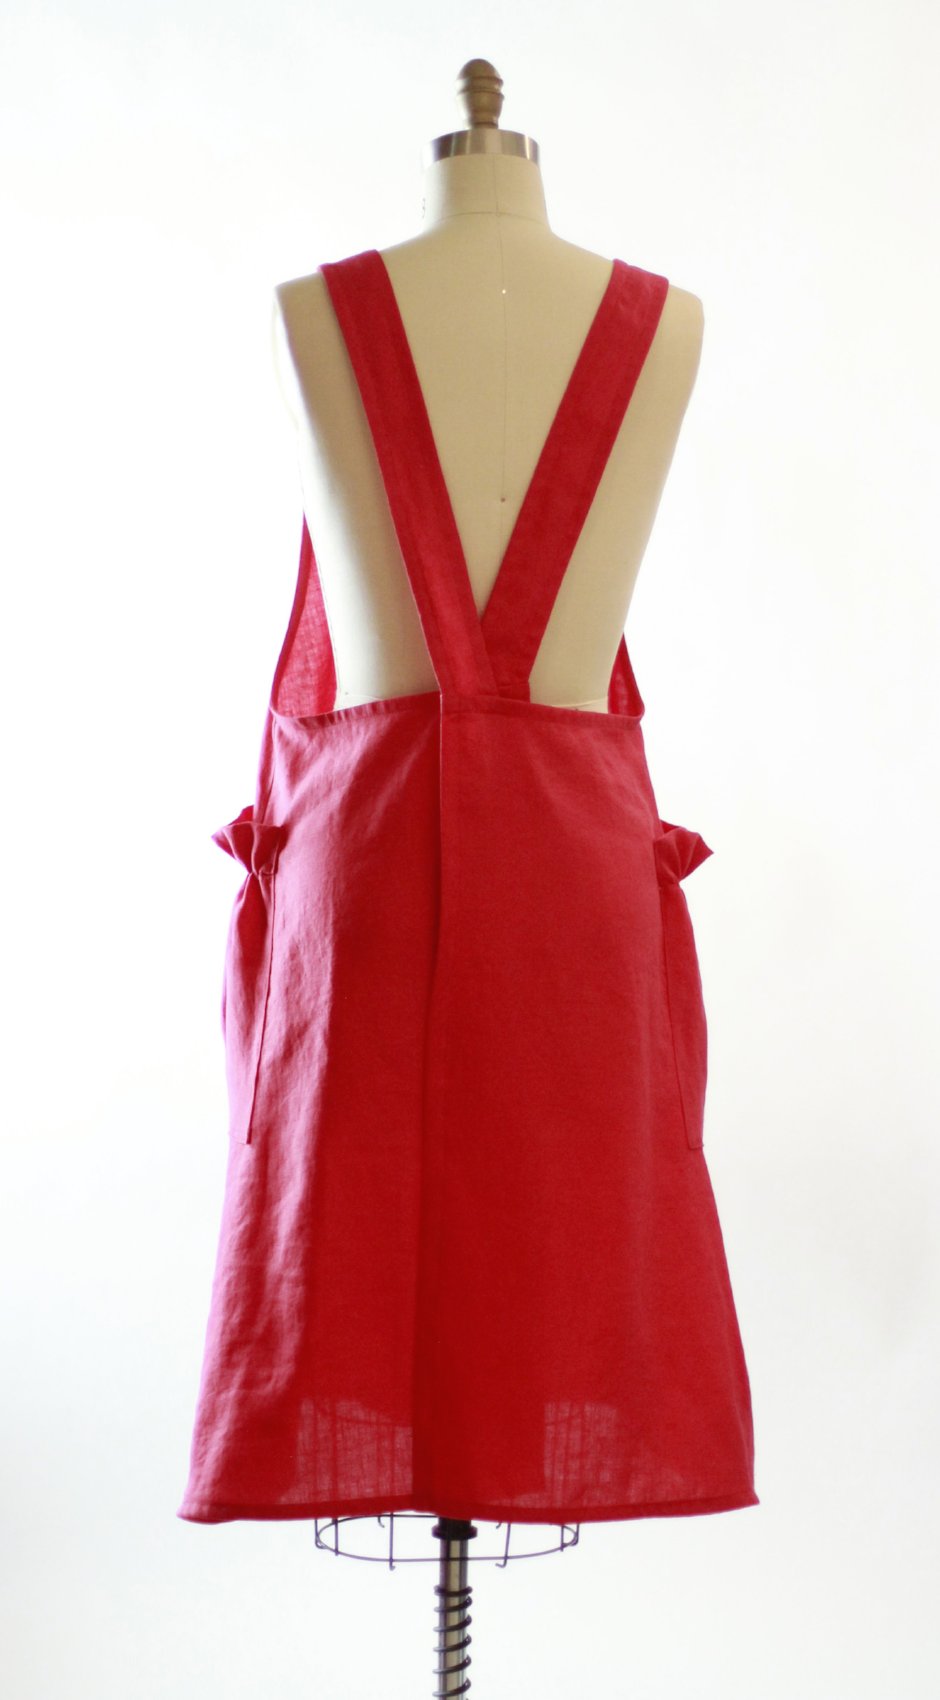 No Tie Crossback Apron in Red 100% Flax Linen XS-5X, back view